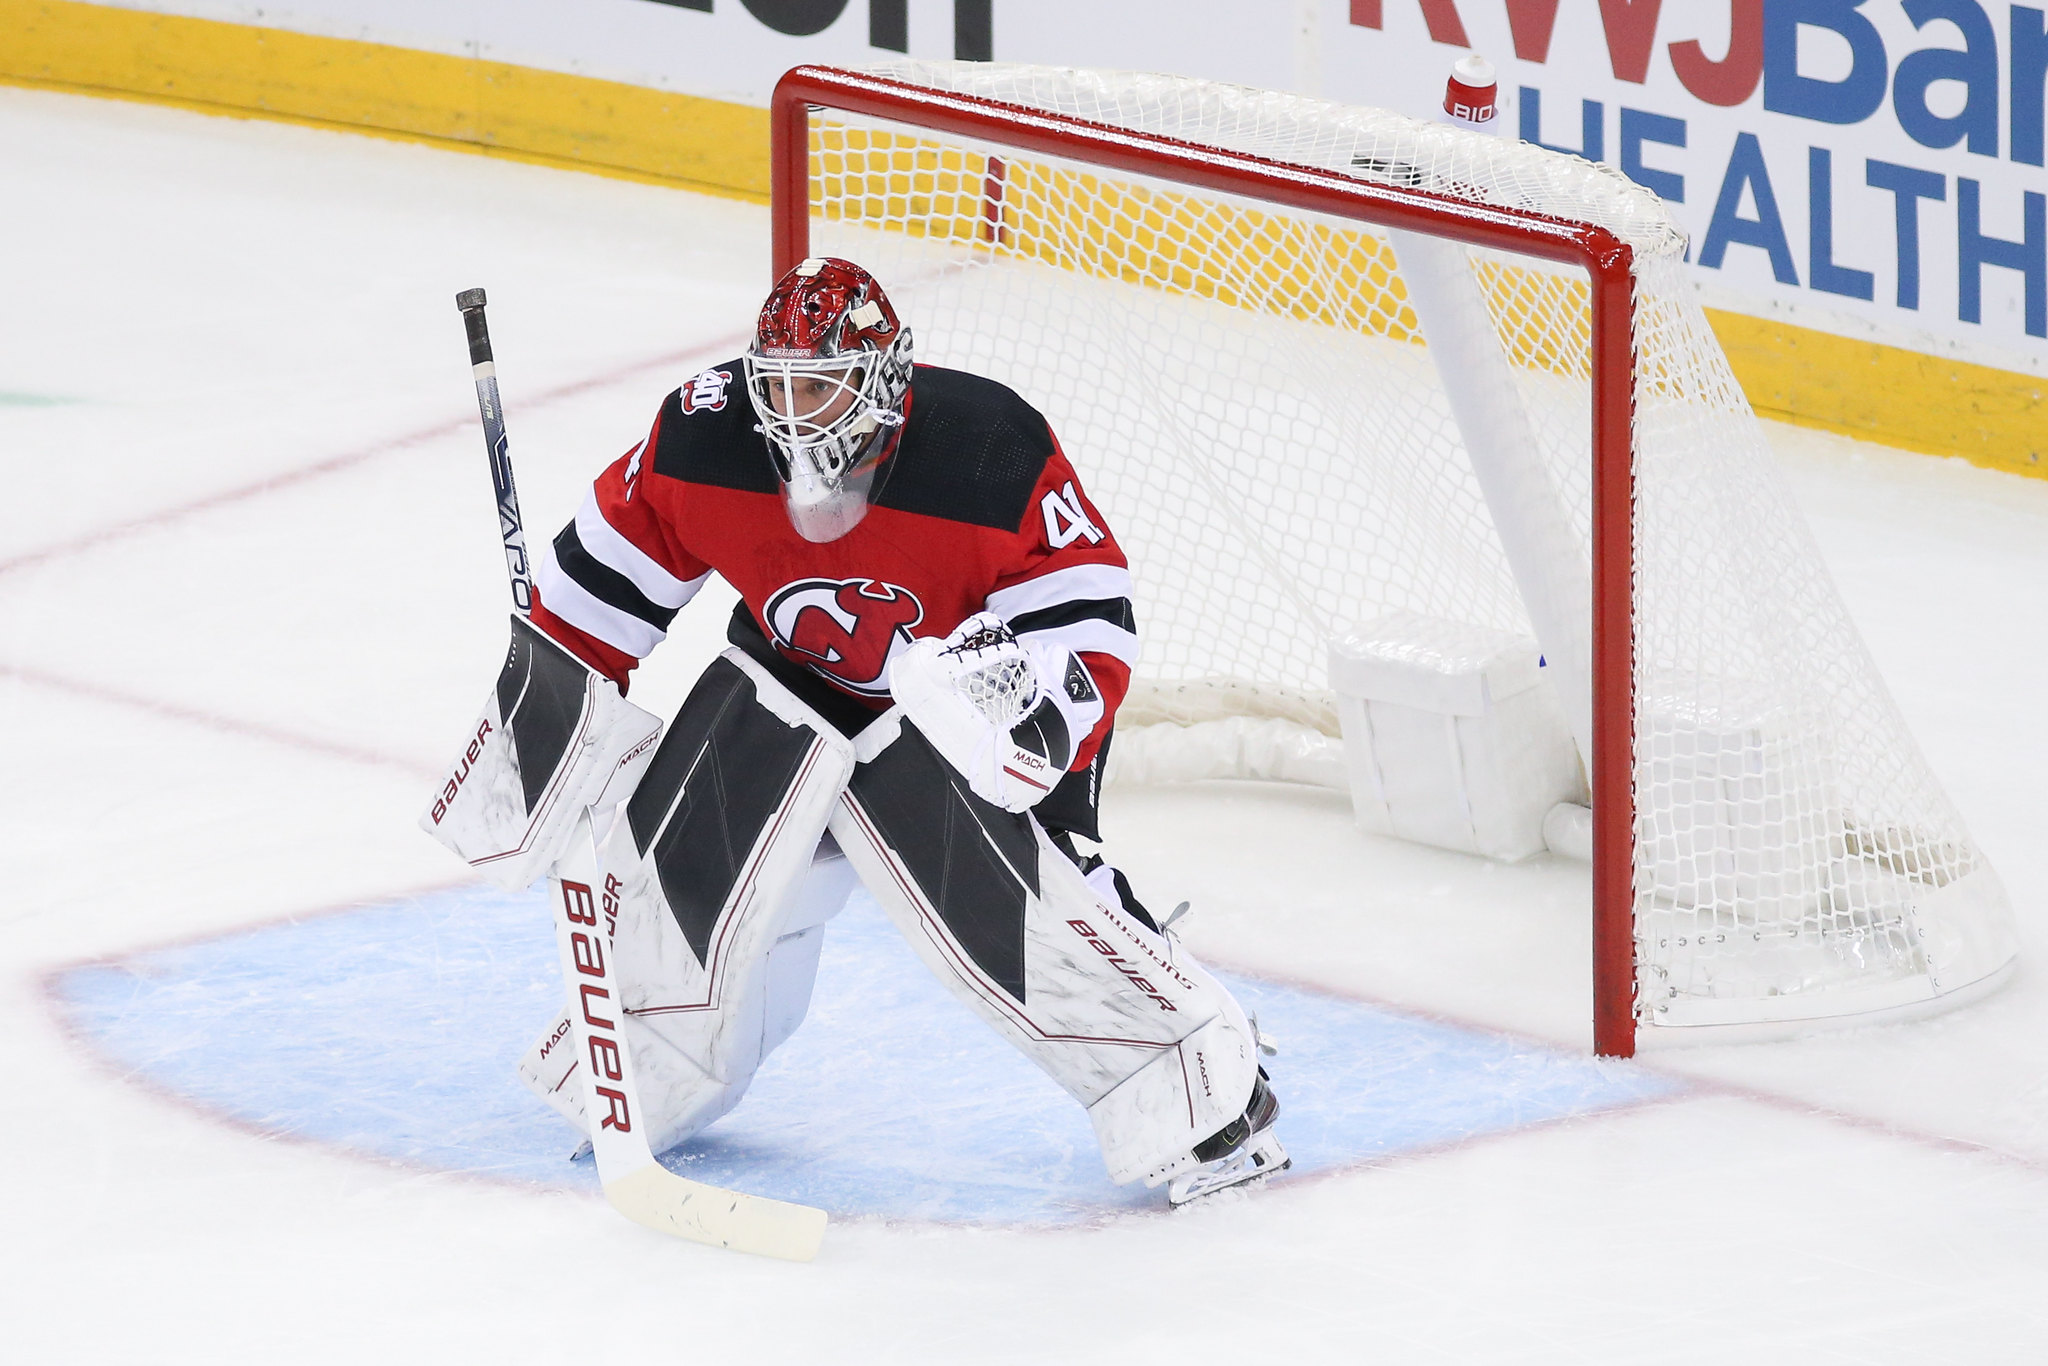 Applaud the Devils for Trying Something Different with New Jersey